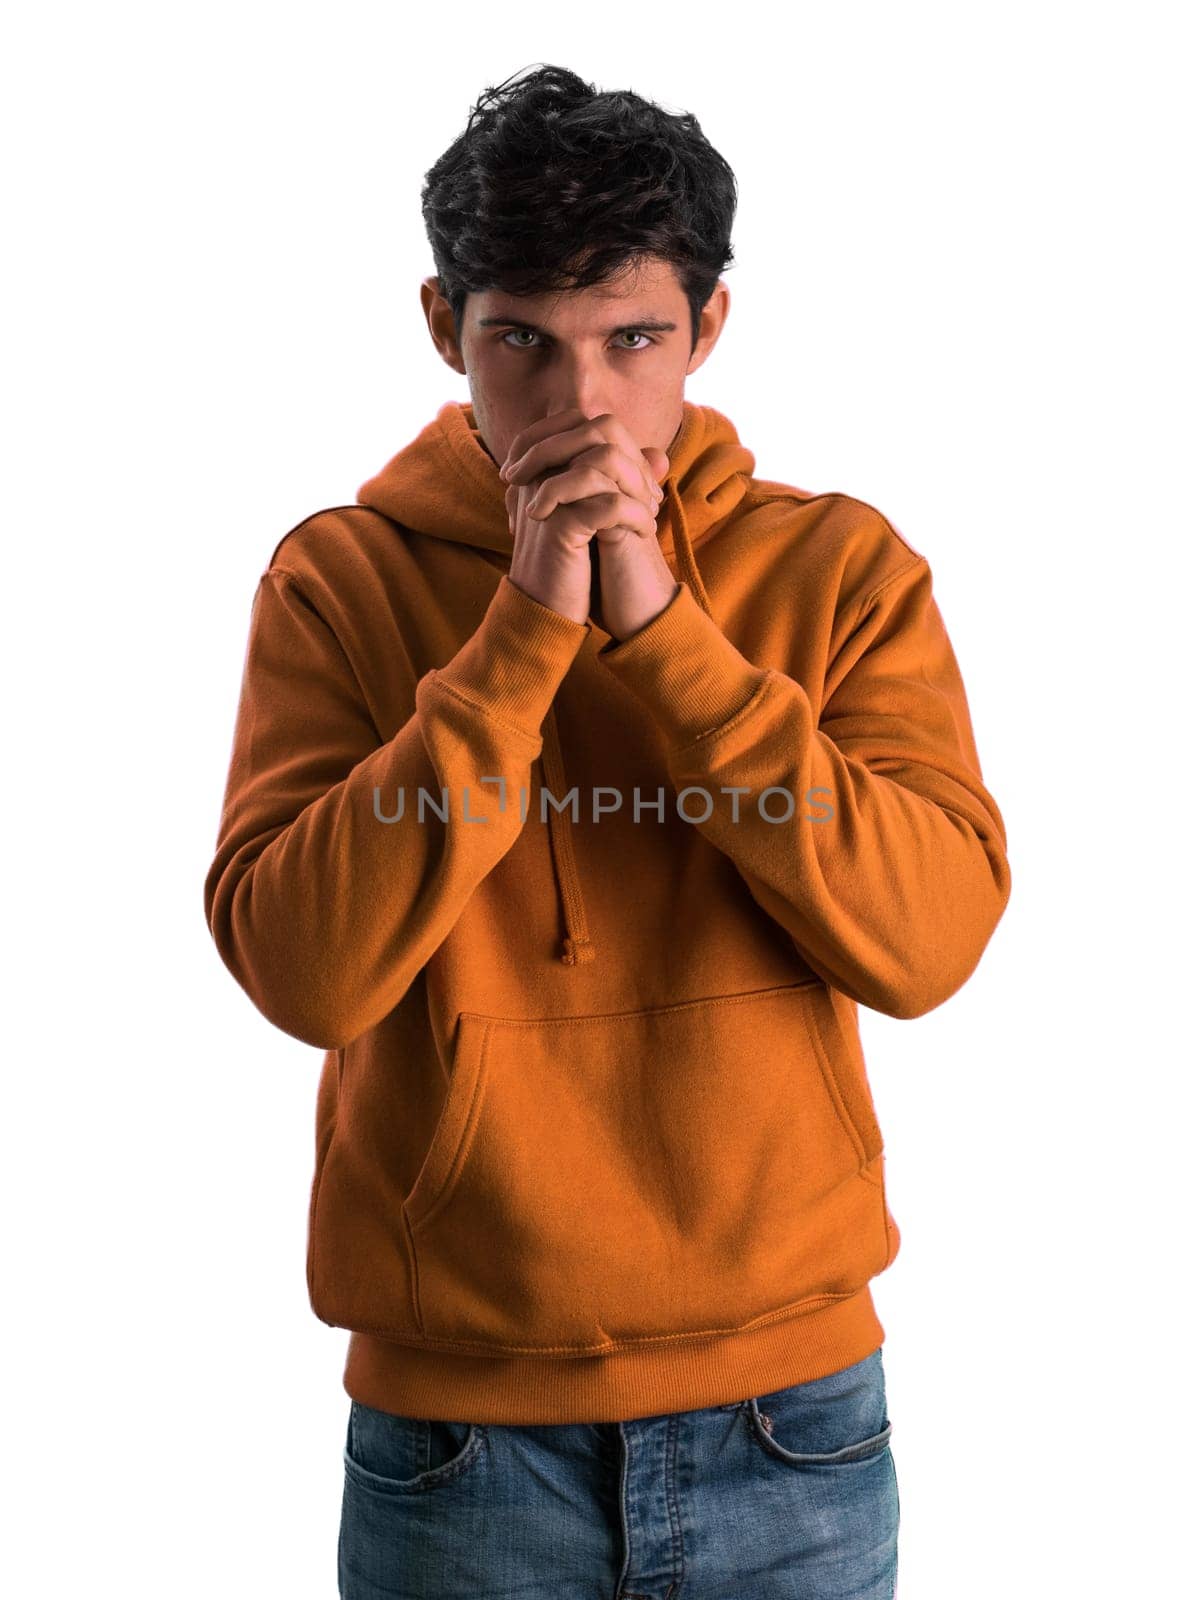 A man wearing an orange hoodie is standing with his hands clasped together. He appears thoughtful and contemplative as he stands in a casual pose.